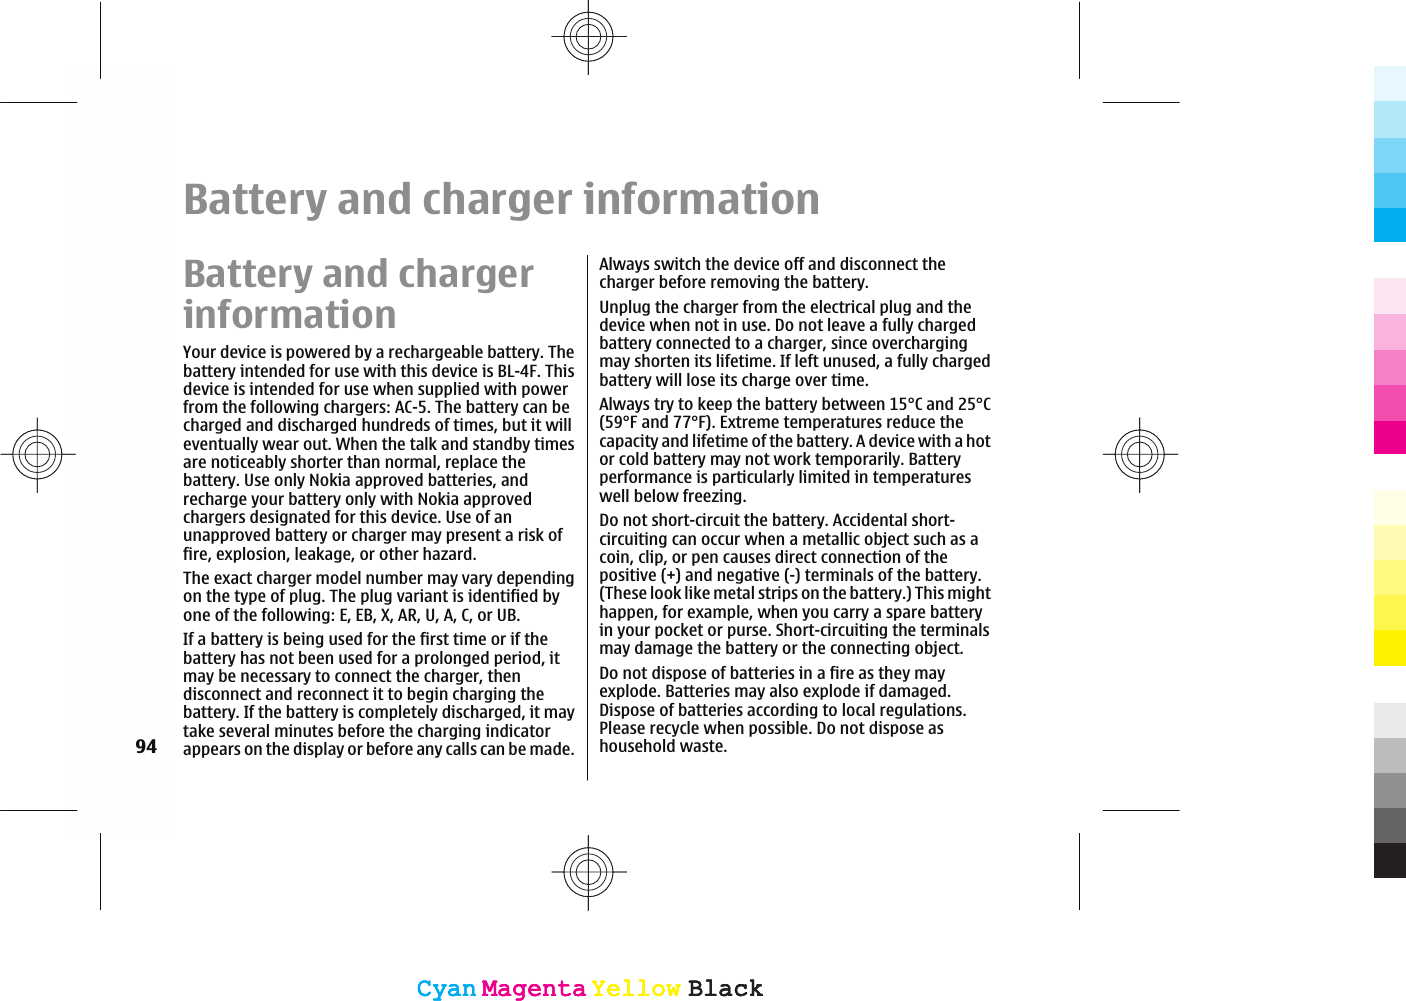 Battery and charger informationBattery and chargerinformationYour device is powered by a rechargeable battery. Thebattery intended for use with this device is BL-4F. Thisdevice is intended for use when supplied with powerfrom the following chargers: AC-5. The battery can becharged and discharged hundreds of times, but it willeventually wear out. When the talk and standby timesare noticeably shorter than normal, replace thebattery. Use only Nokia approved batteries, andrecharge your battery only with Nokia approvedchargers designated for this device. Use of anunapproved battery or charger may present a risk offire, explosion, leakage, or other hazard.The exact charger model number may vary dependingon the type of plug. The plug variant is identified byone of the following: E, EB, X, AR, U, A, C, or UB.If a battery is being used for the first time or if thebattery has not been used for a prolonged period, itmay be necessary to connect the charger, thendisconnect and reconnect it to begin charging thebattery. If the battery is completely discharged, it maytake several minutes before the charging indicatorappears on the display or before any calls can be made.Always switch the device off and disconnect thecharger before removing the battery.Unplug the charger from the electrical plug and thedevice when not in use. Do not leave a fully chargedbattery connected to a charger, since overchargingmay shorten its lifetime. If left unused, a fully chargedbattery will lose its charge over time.Always try to keep the battery between 15°C and 25°C(59°F and 77°F). Extreme temperatures reduce thecapacity and lifetime of the battery. A device with a hotor cold battery may not work temporarily. Batteryperformance is particularly limited in temperatureswell below freezing.Do not short-circuit the battery. Accidental short-circuiting can occur when a metallic object such as acoin, clip, or pen causes direct connection of thepositive (+) and negative (-) terminals of the battery.(These look like metal strips on the battery.) This mighthappen, for example, when you carry a spare batteryin your pocket or purse. Short-circuiting the terminalsmay damage the battery or the connecting object.Do not dispose of batteries in a fire as they mayexplode. Batteries may also explode if damaged.Dispose of batteries according to local regulations.Please recycle when possible. Do not dispose ashousehold waste.94CyanCyanMagentaMagentaYellowYellowBlackBlackCyanCyanMagentaMagentaYellowYellowBlackBlack